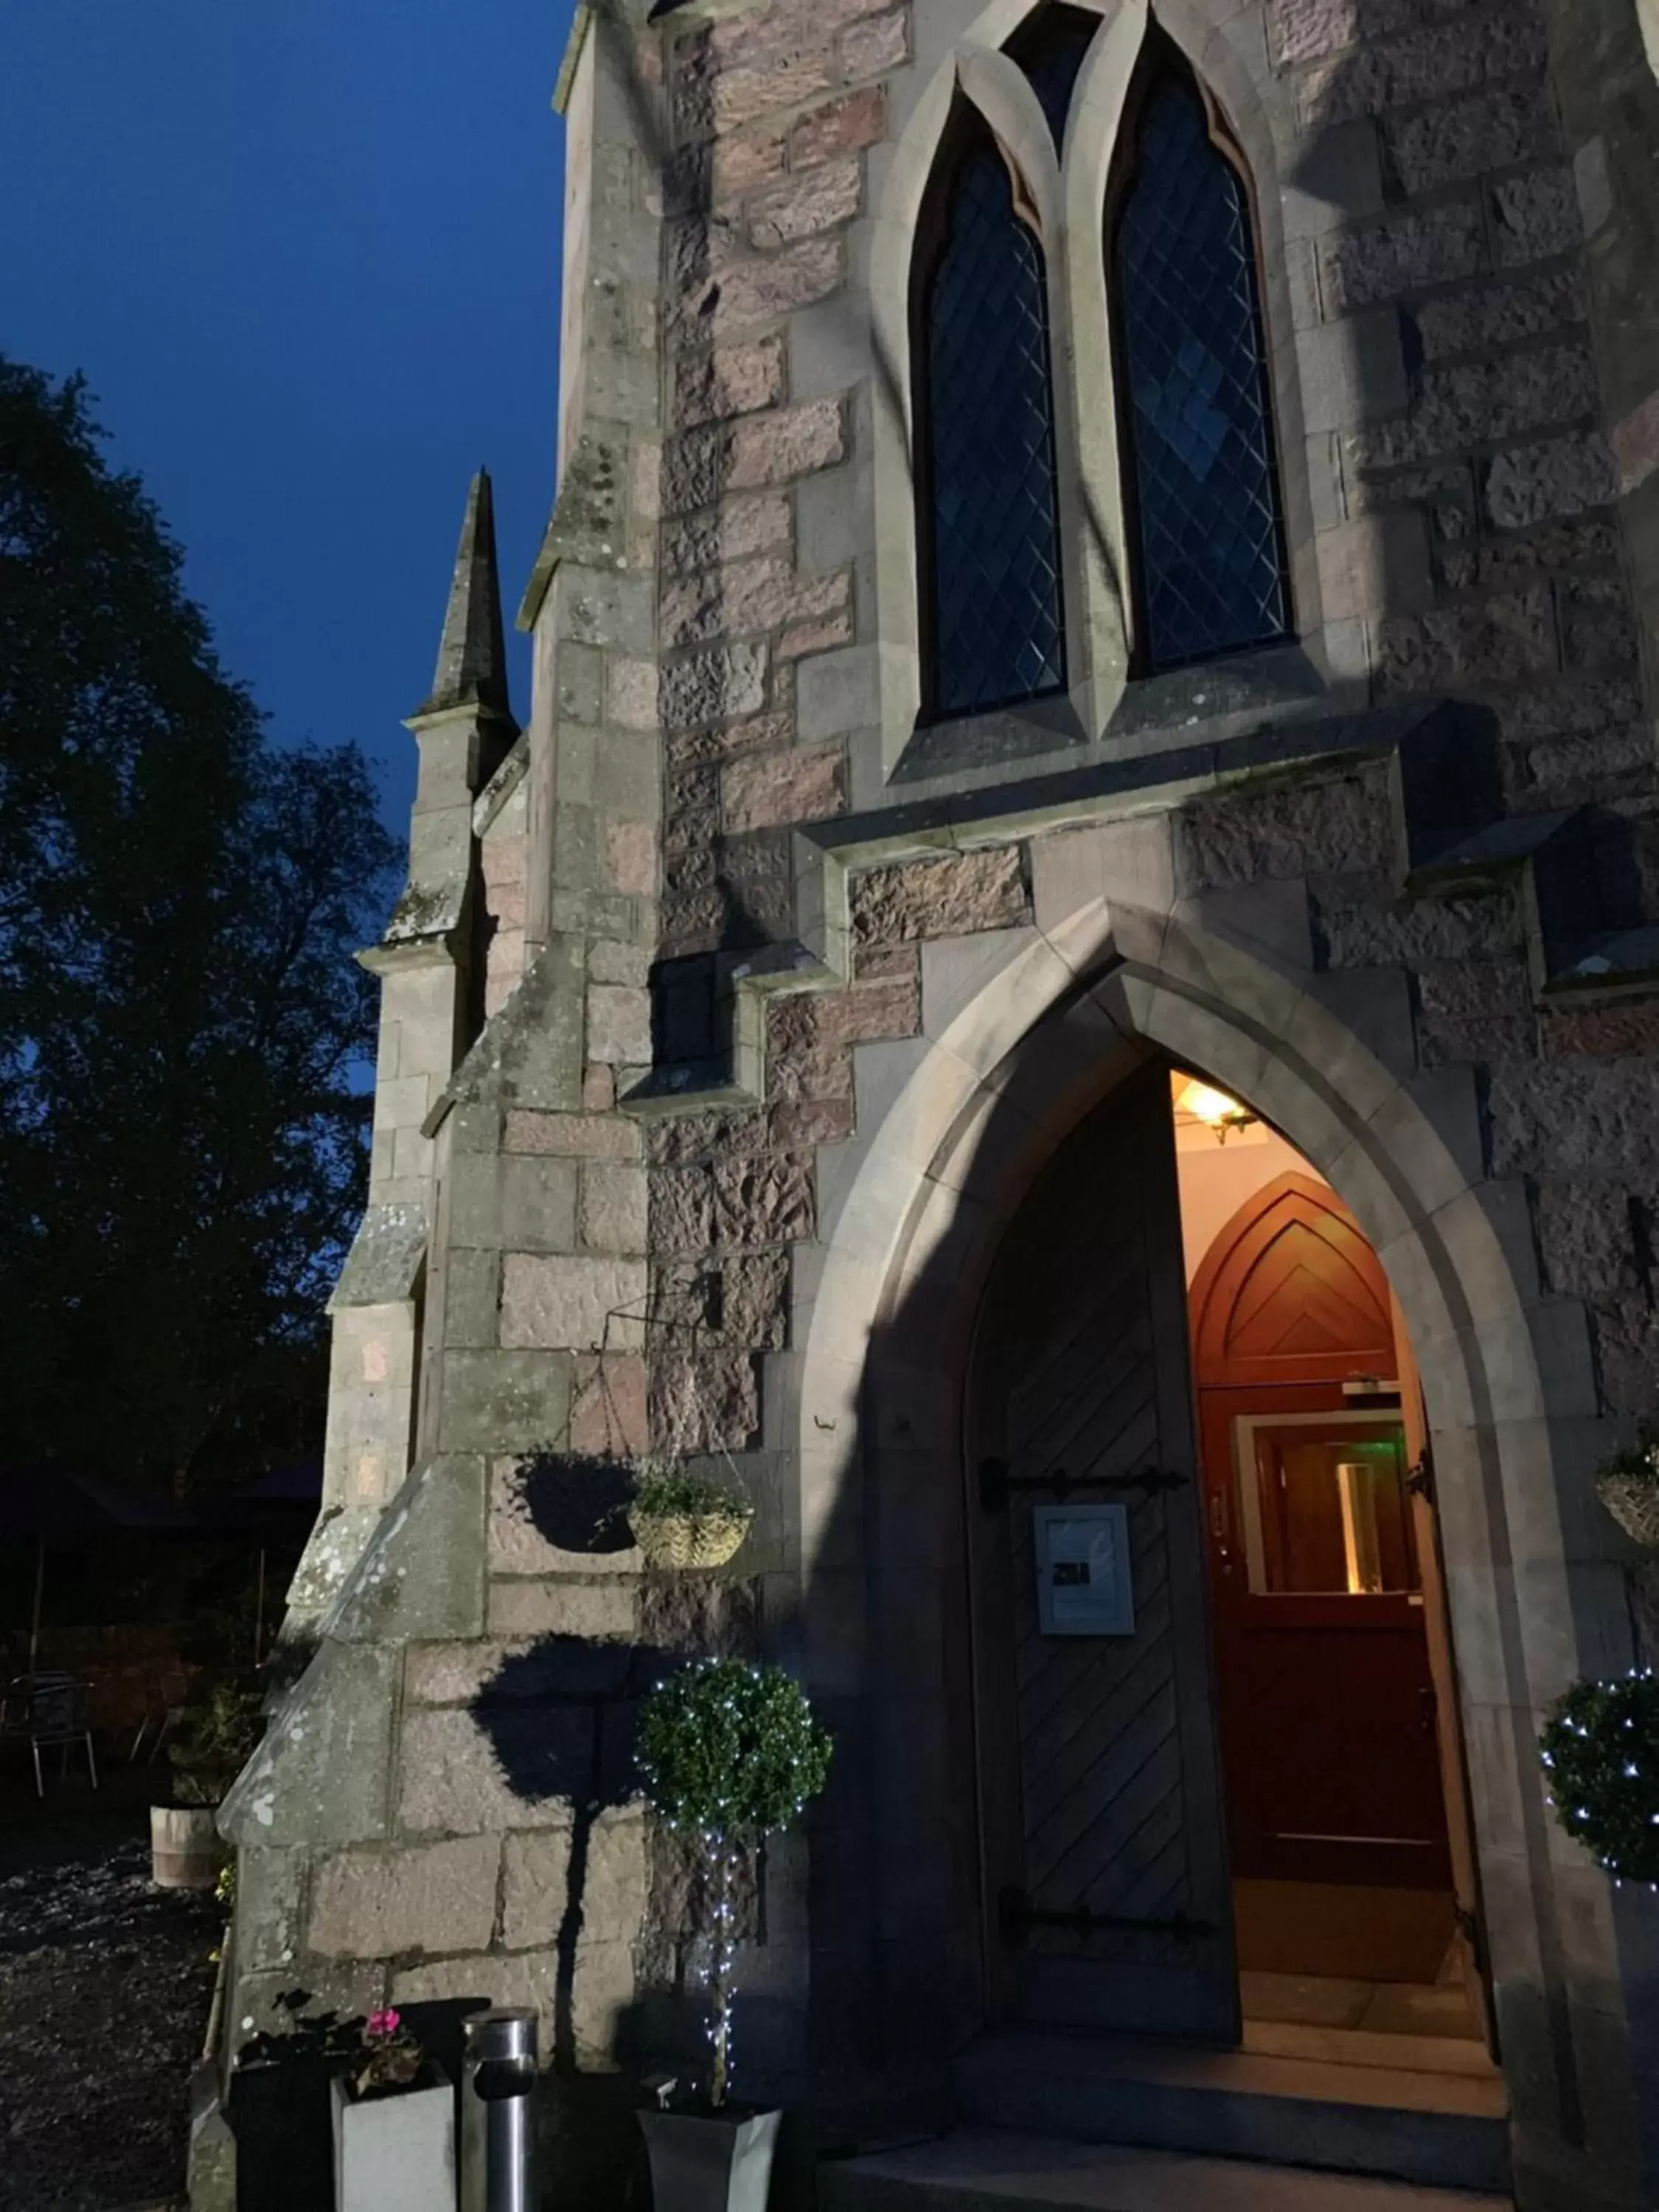 Facade/entrance in The Auld Kirk